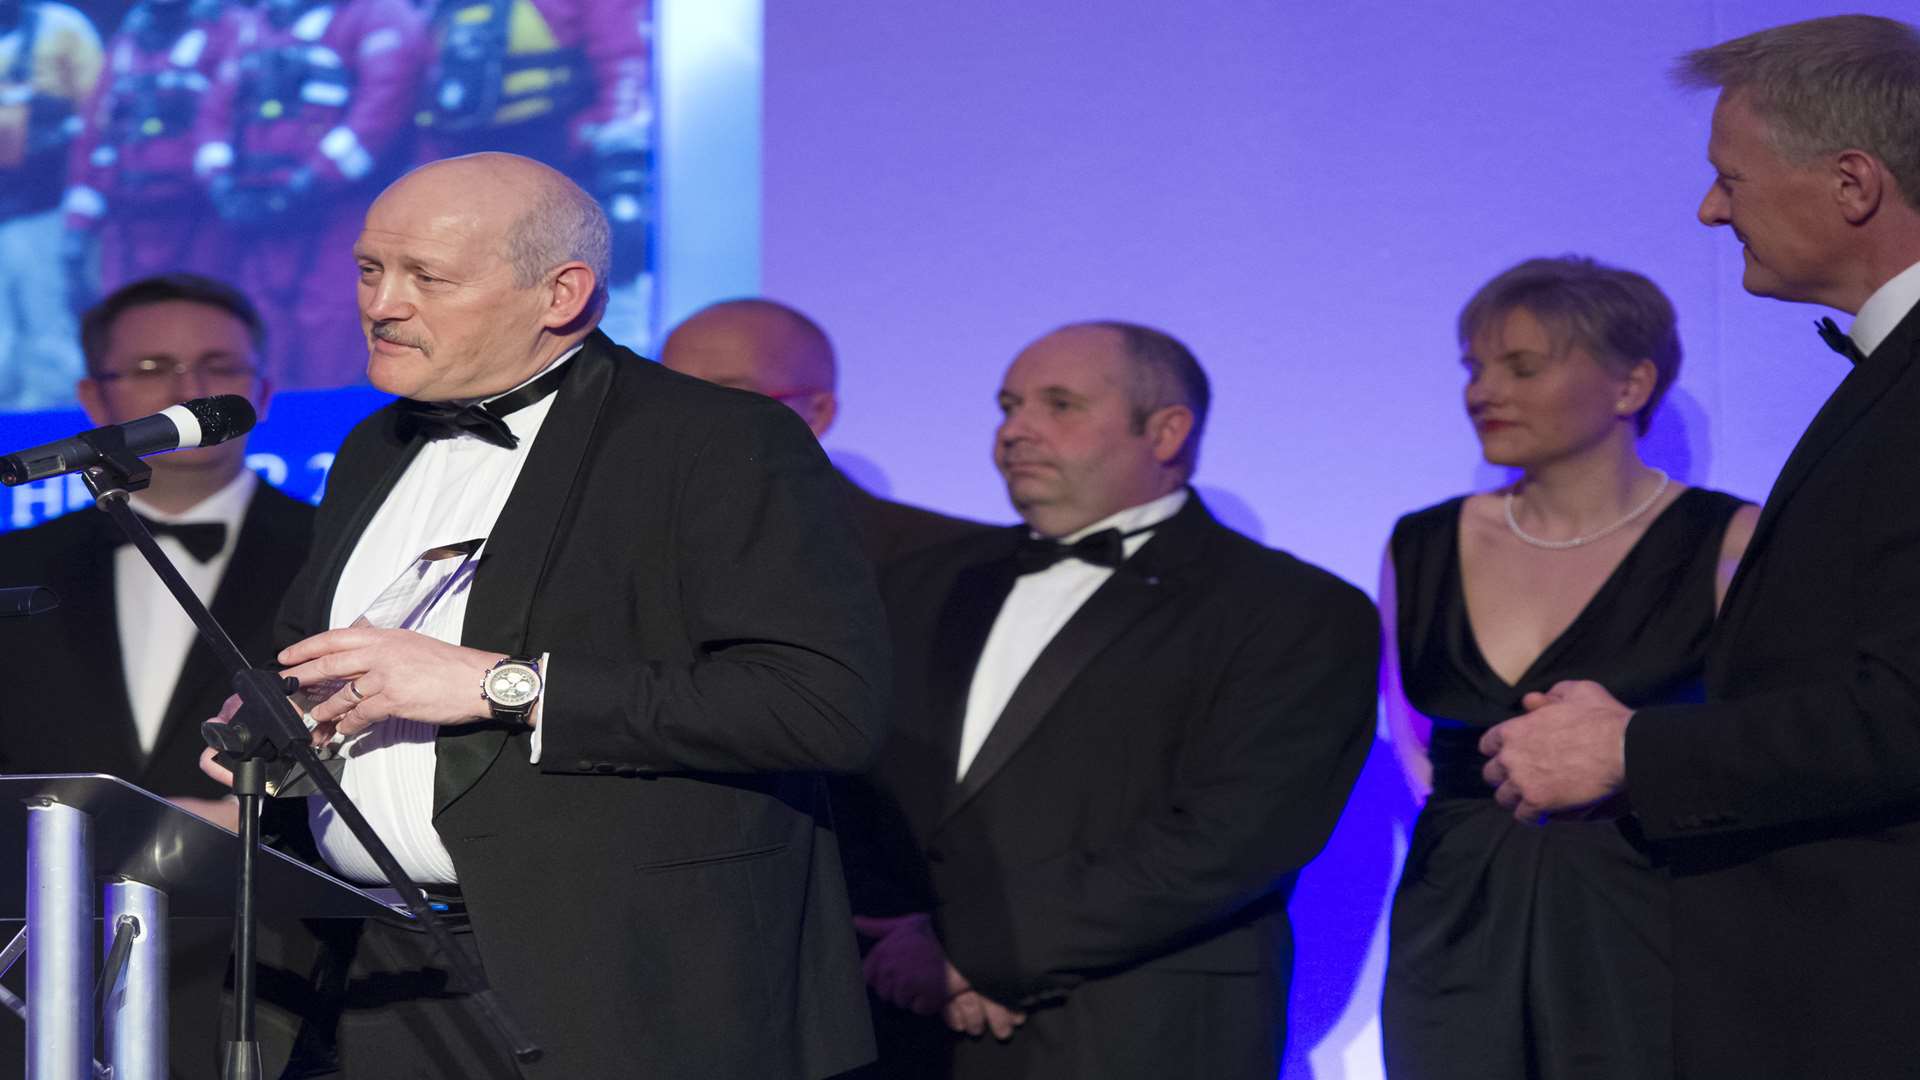 Paul Lewis, from overall winners 2015, Kent Search and Rescue, accepts the award on-stage